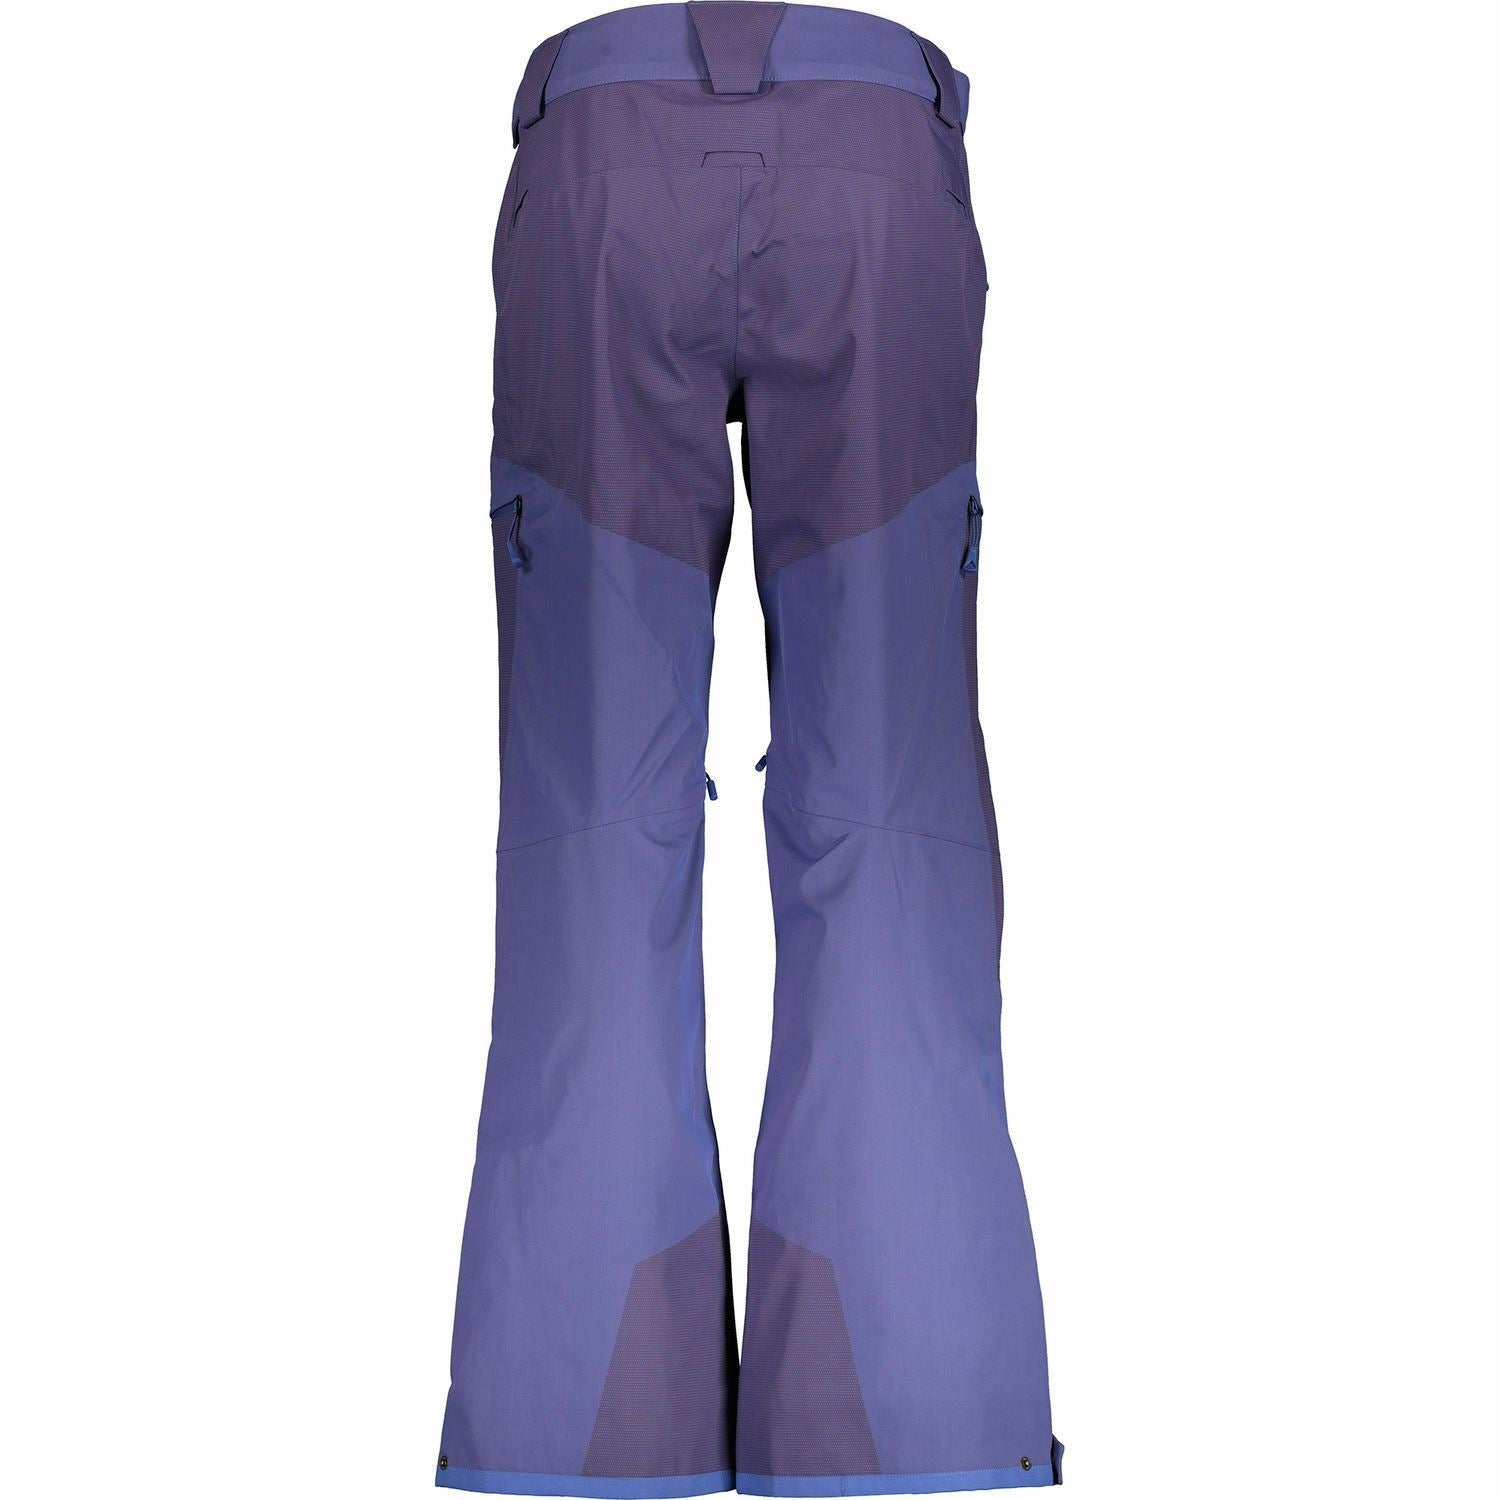 THE NORTH FACE Women's Fuseform Brigandine 3L Trousers Regular size S & size M